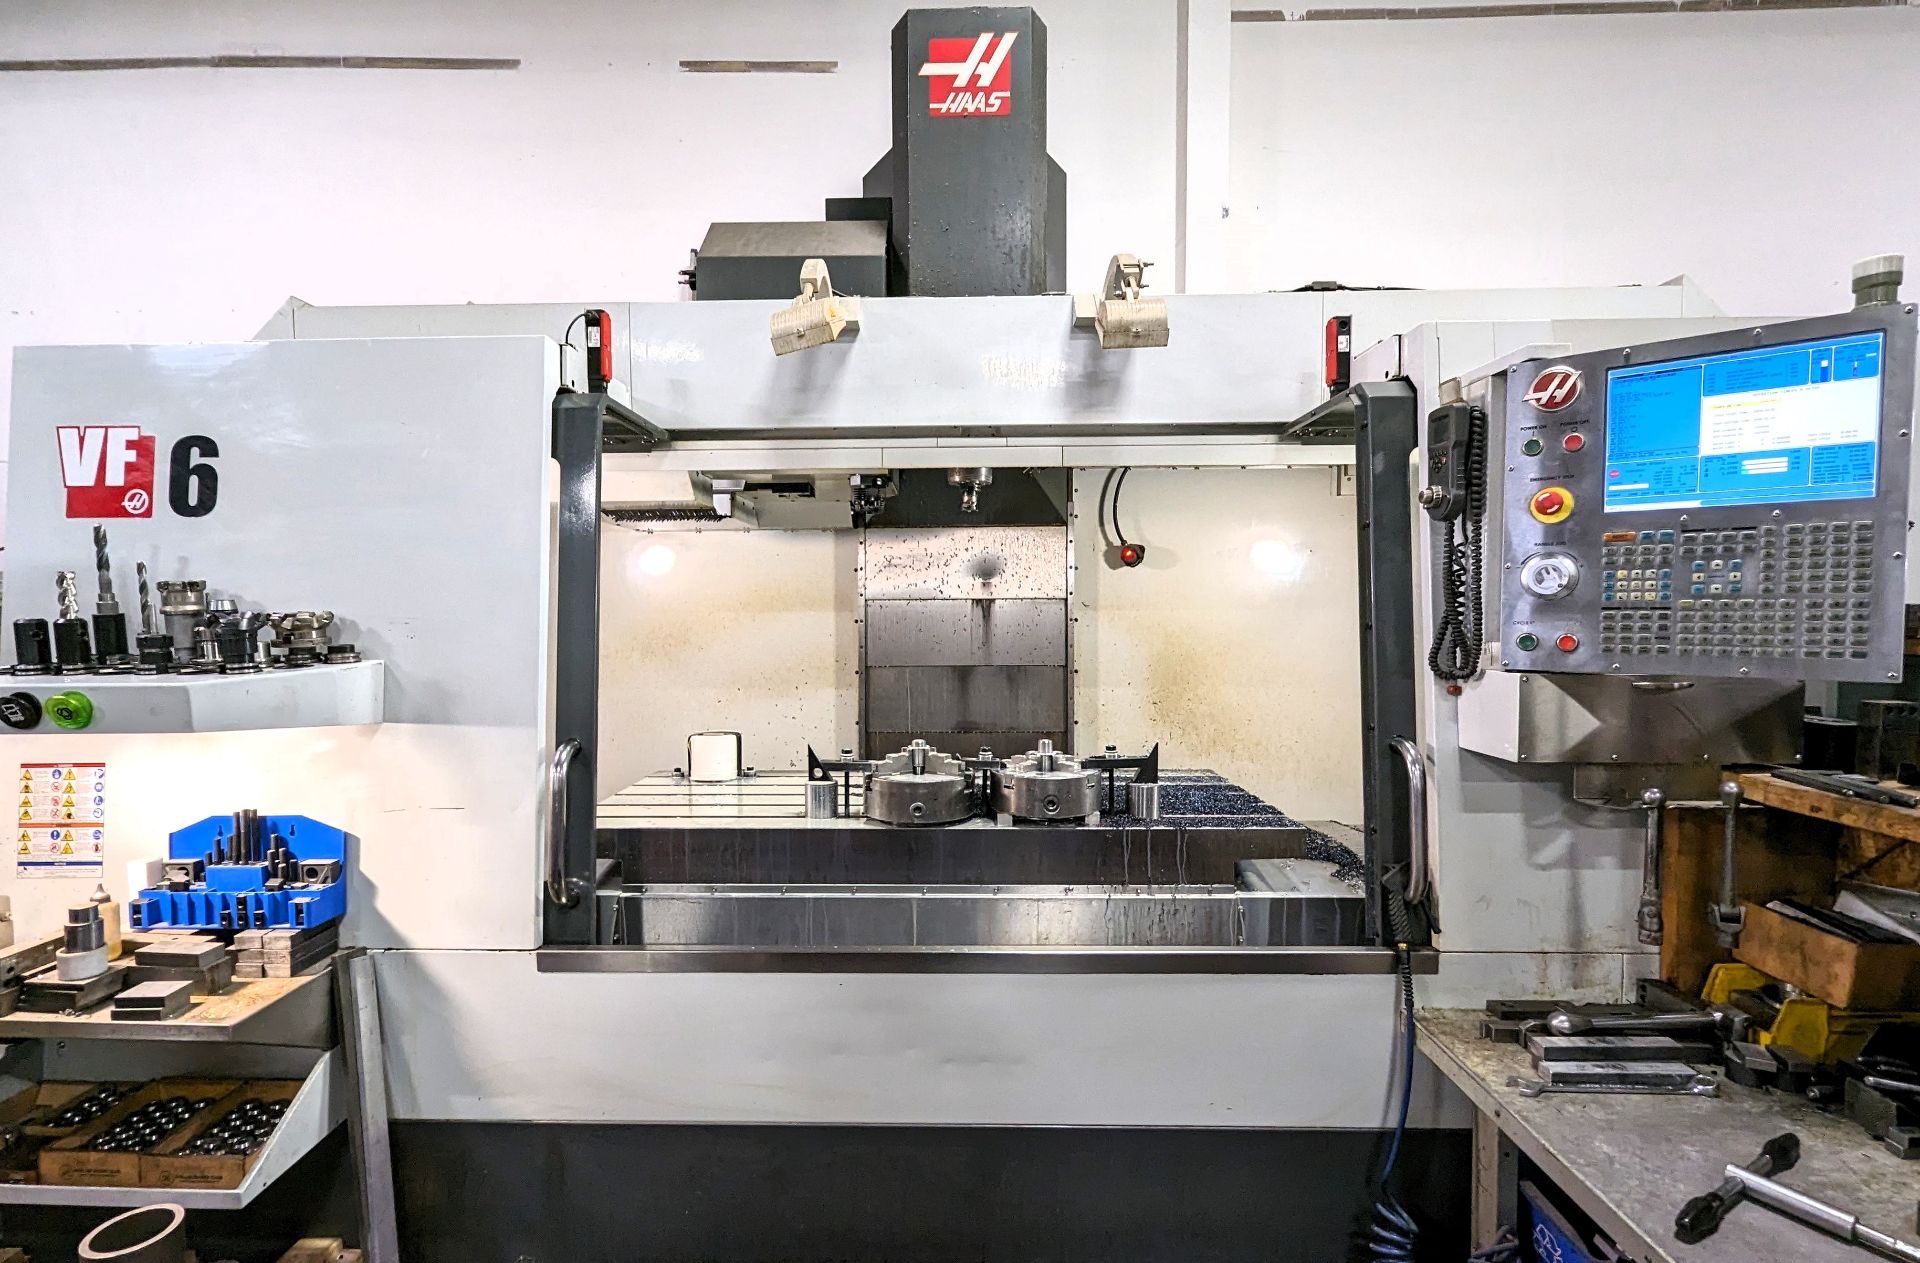 2012 HAAS VF6/40 CNC VERTICAL MACHINING CENTER, CNC CONTROL, 24” X 60” TABLE, 40 TAPER, 10,000 RPM - Image 2 of 17